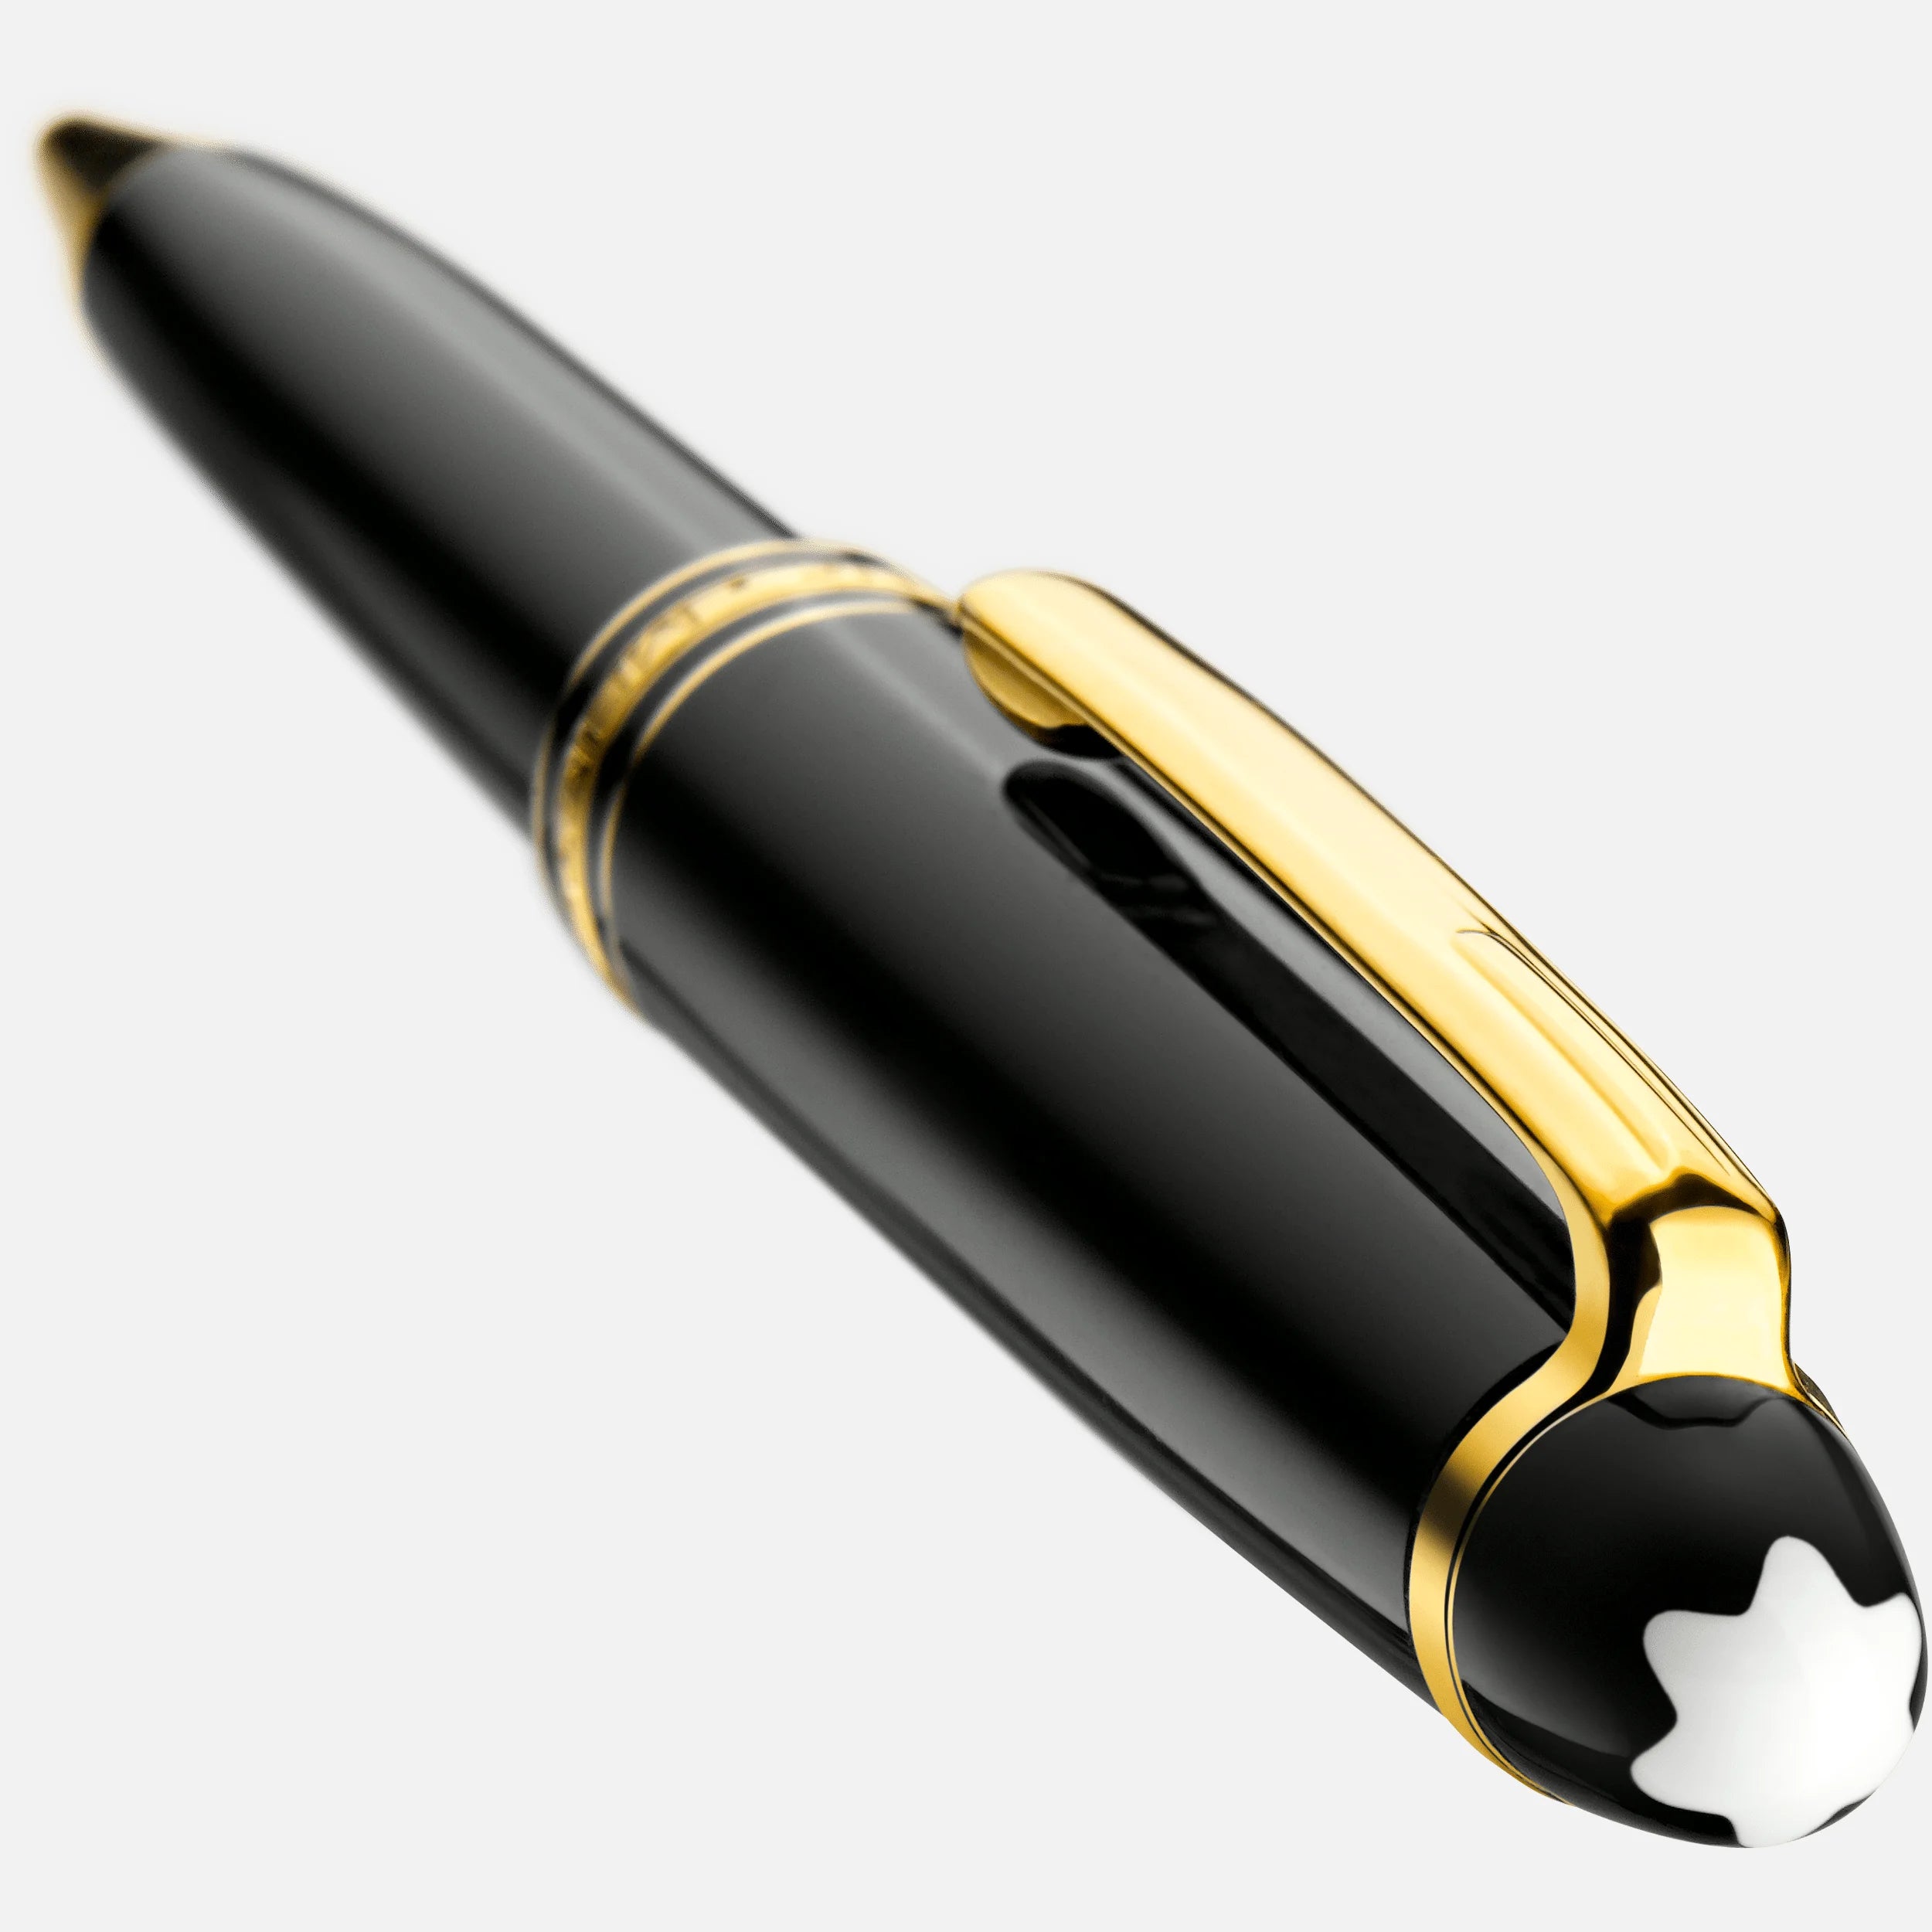 MONTBLANC | Penna a sfera Meisterstück Gold-Coated LeGrand | MB10456